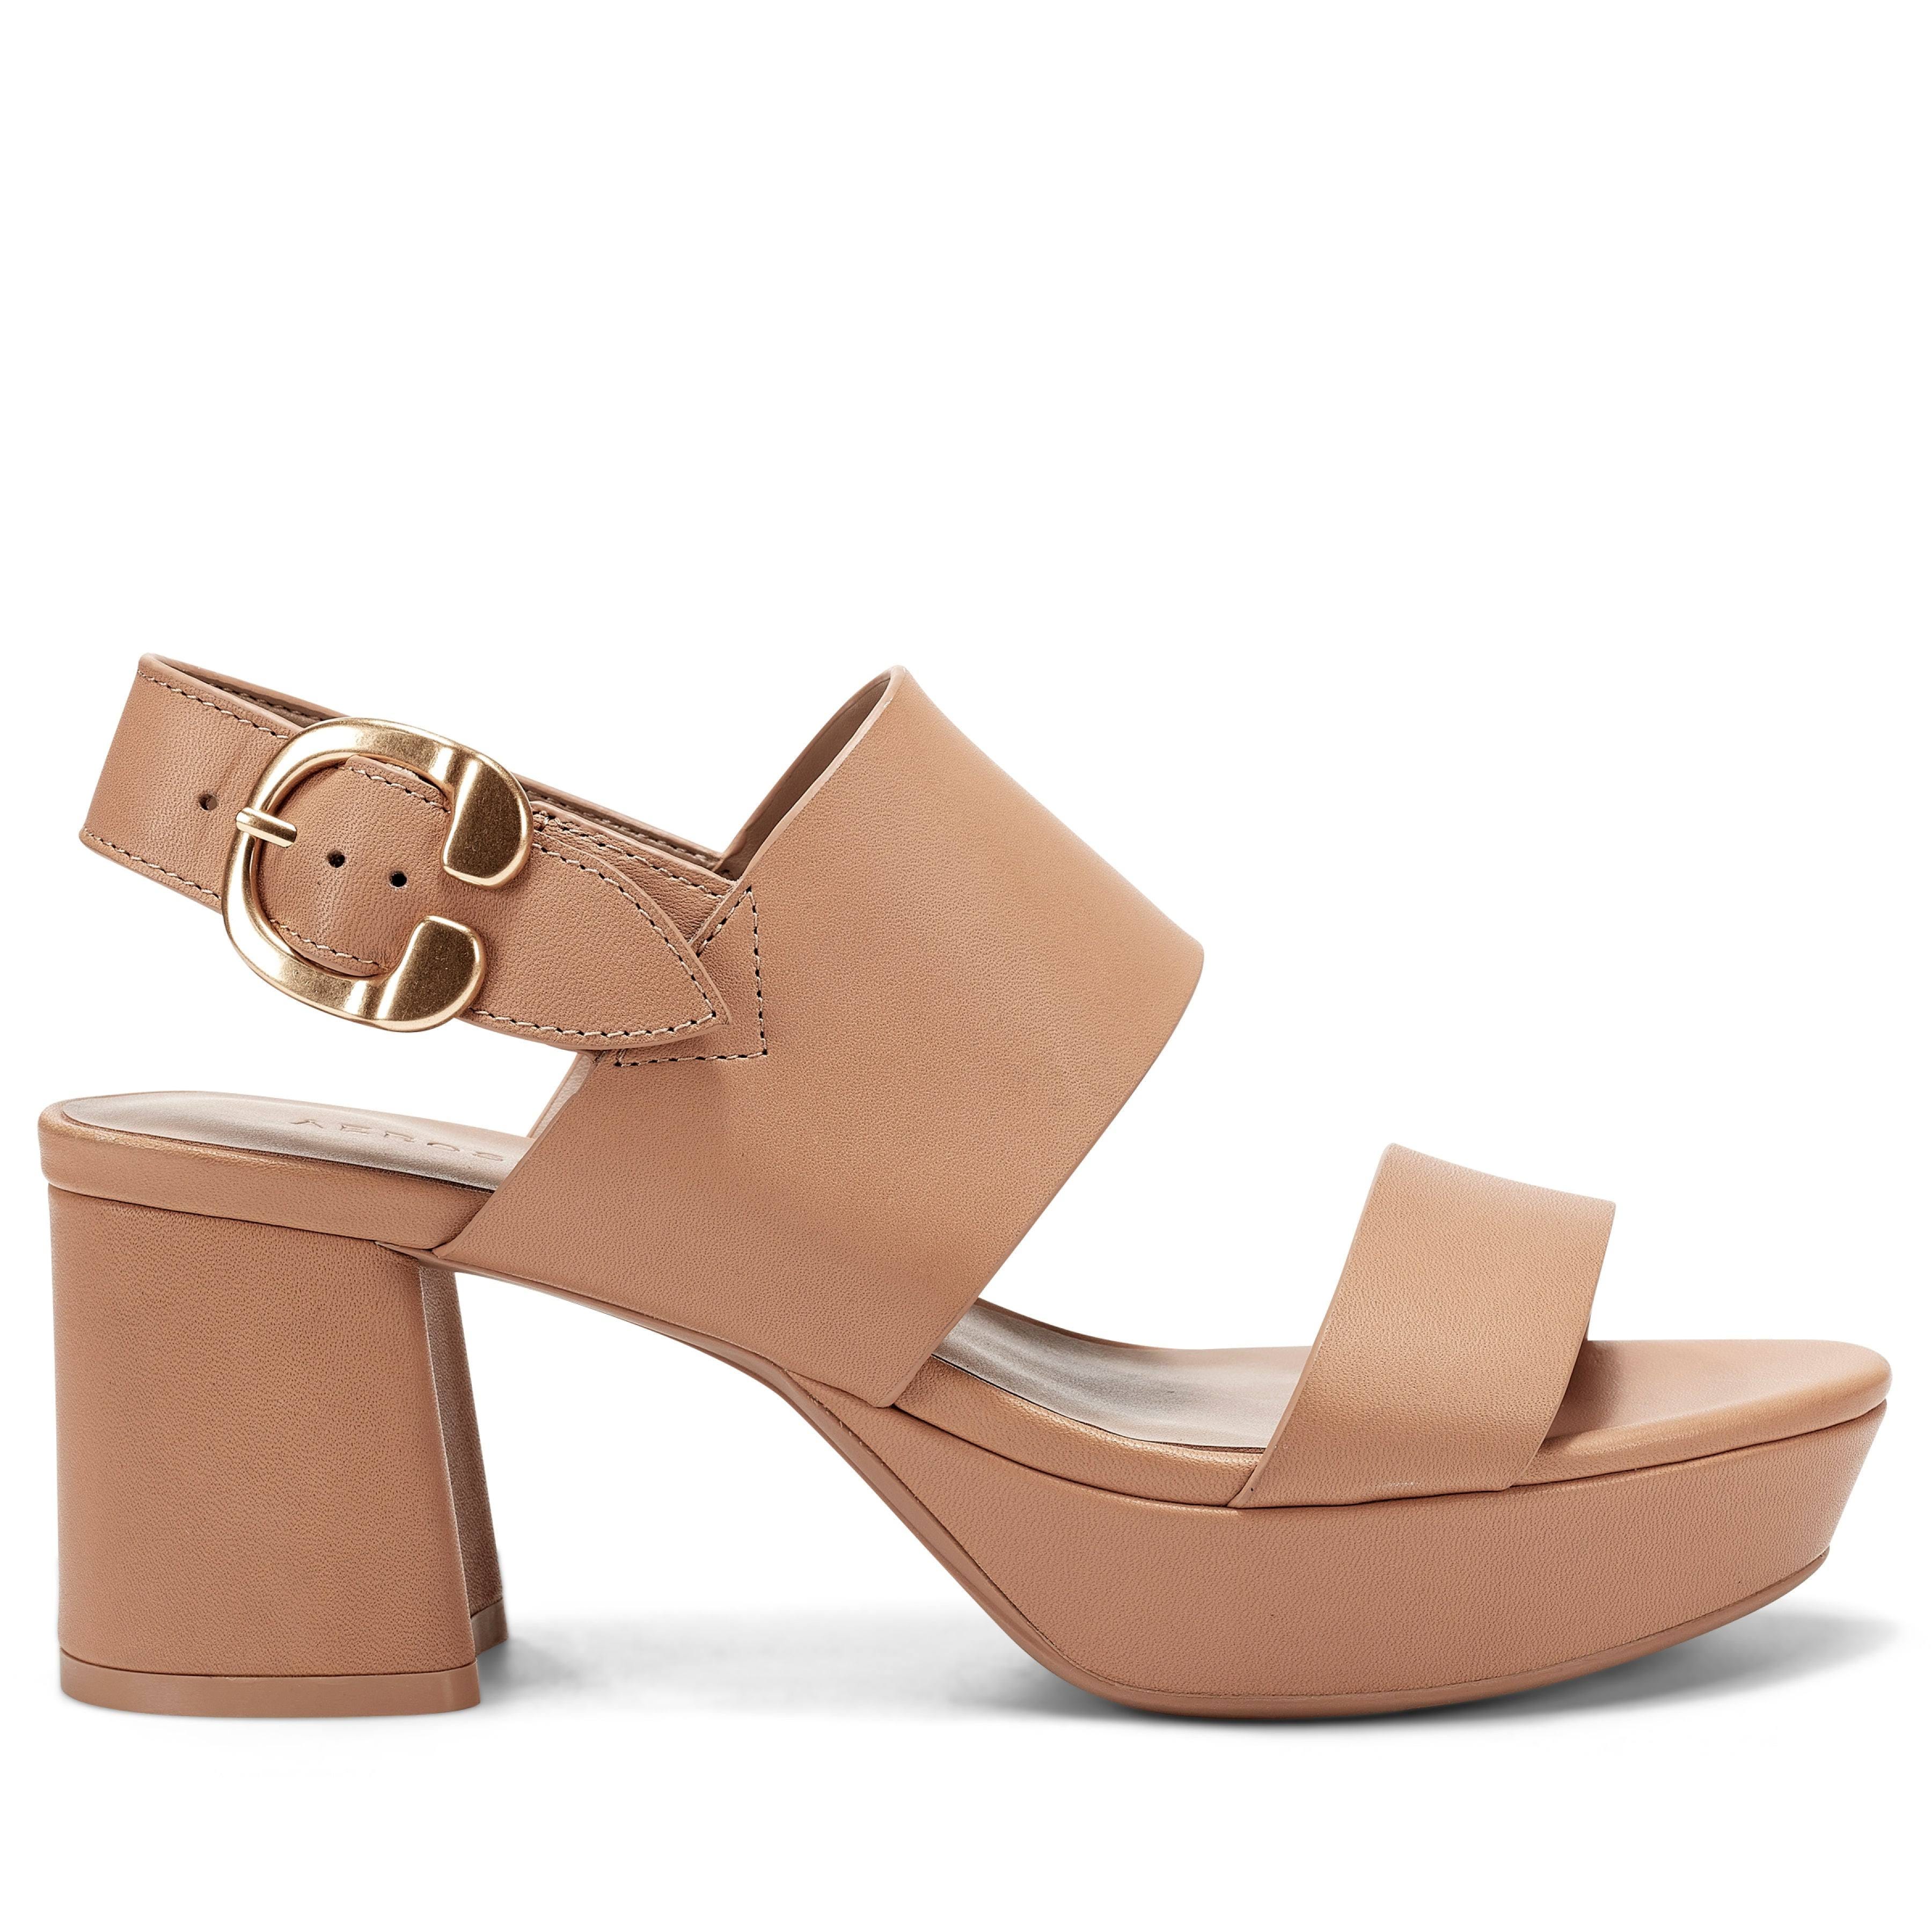 Luxury Nude Leather Slingback Sandals by Aerosoles for Women | Image